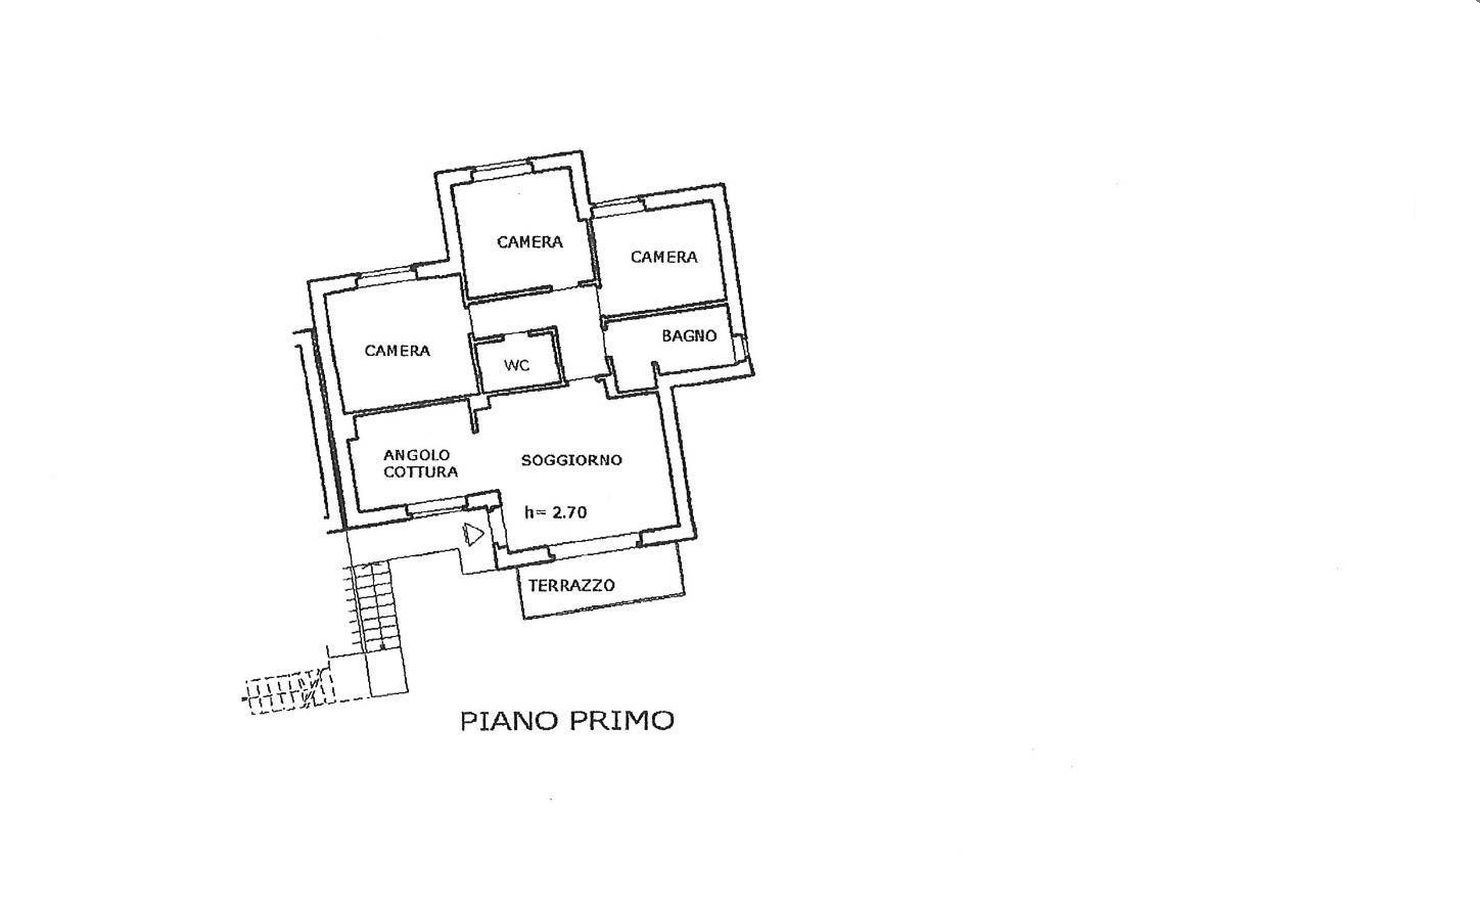 Apartment for sale, ref. R/671 (Plan 1/1)